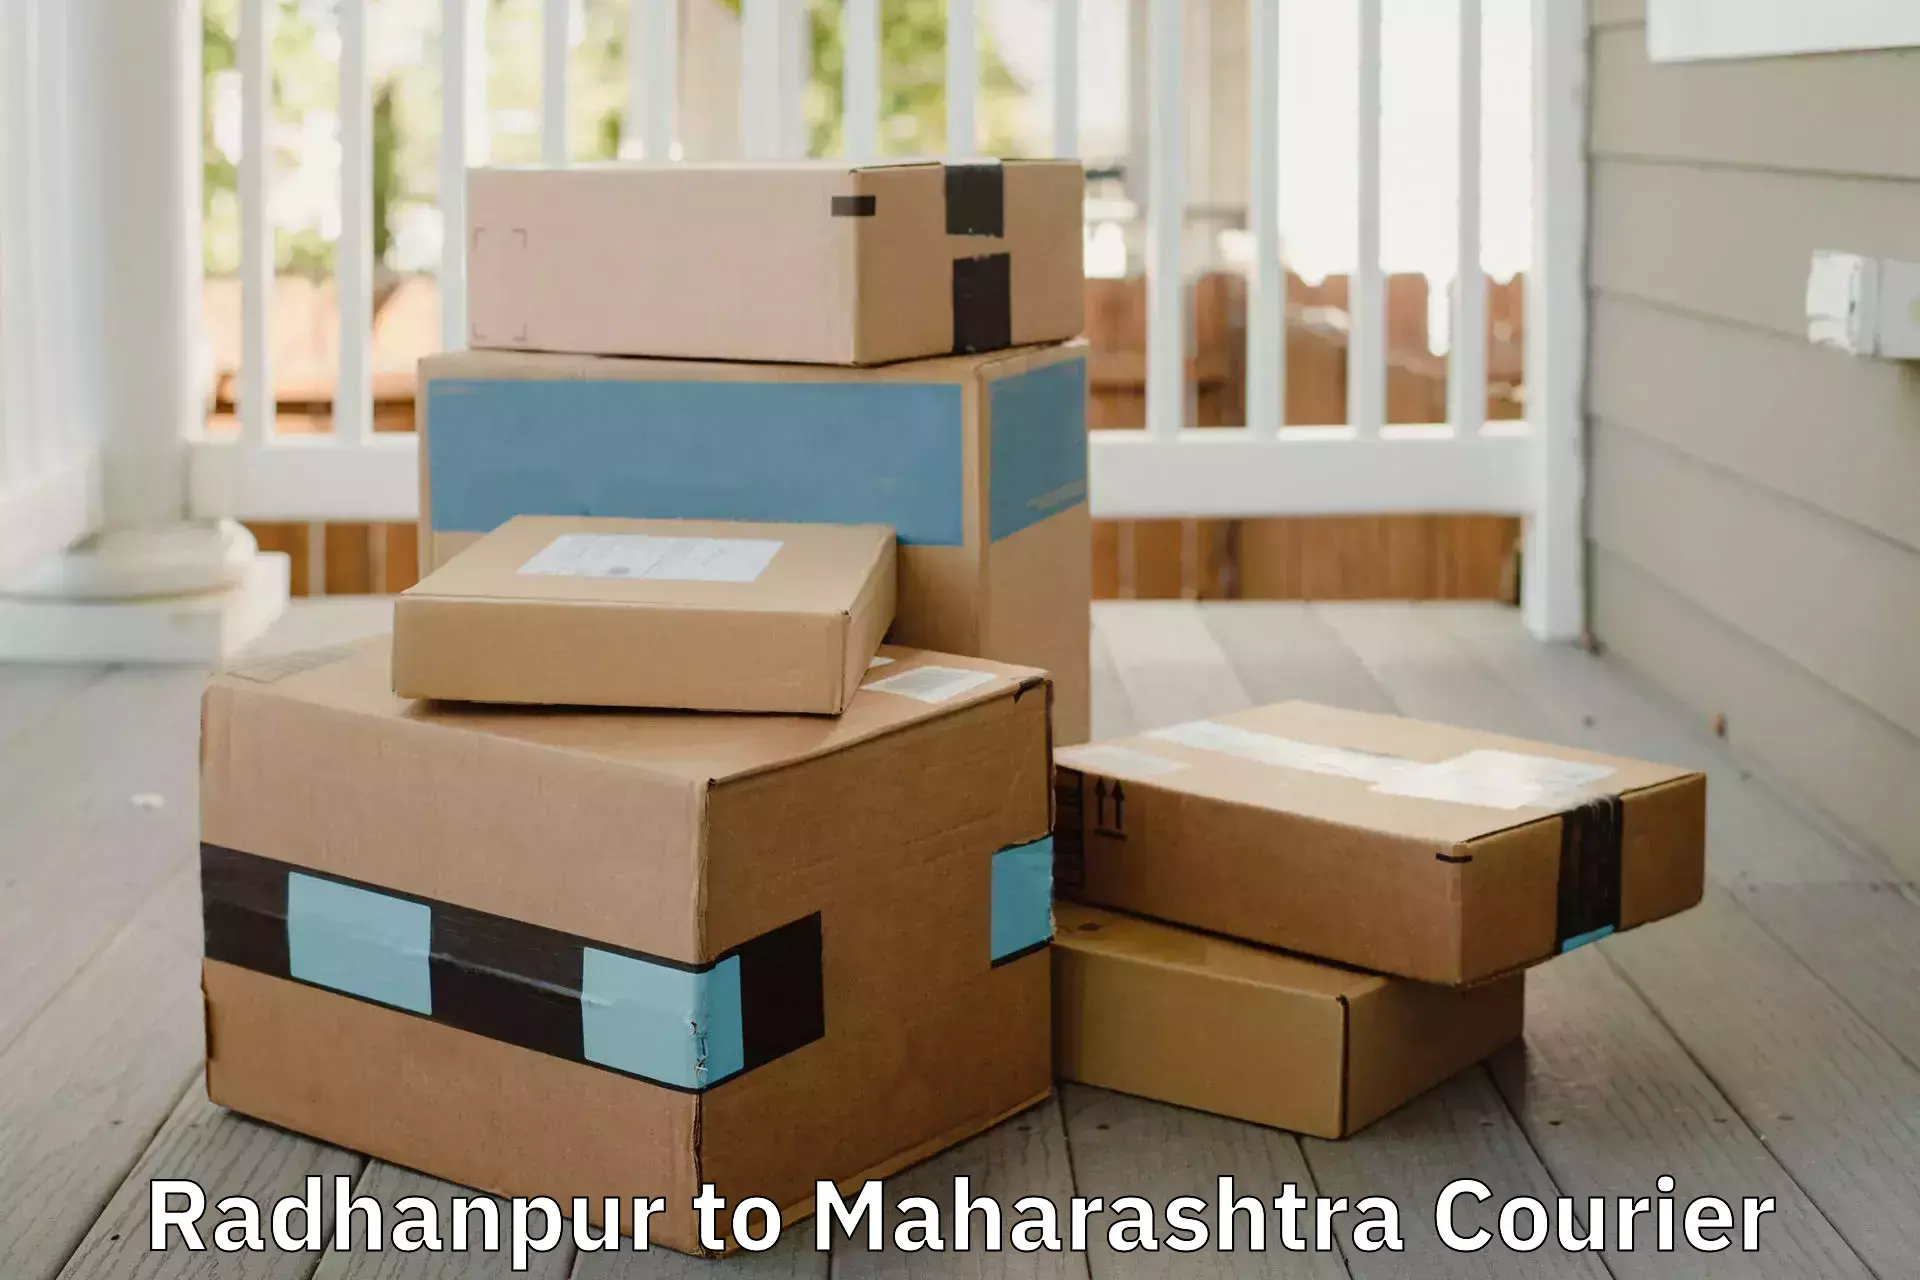 Efficient moving company Radhanpur to Sindhudurg